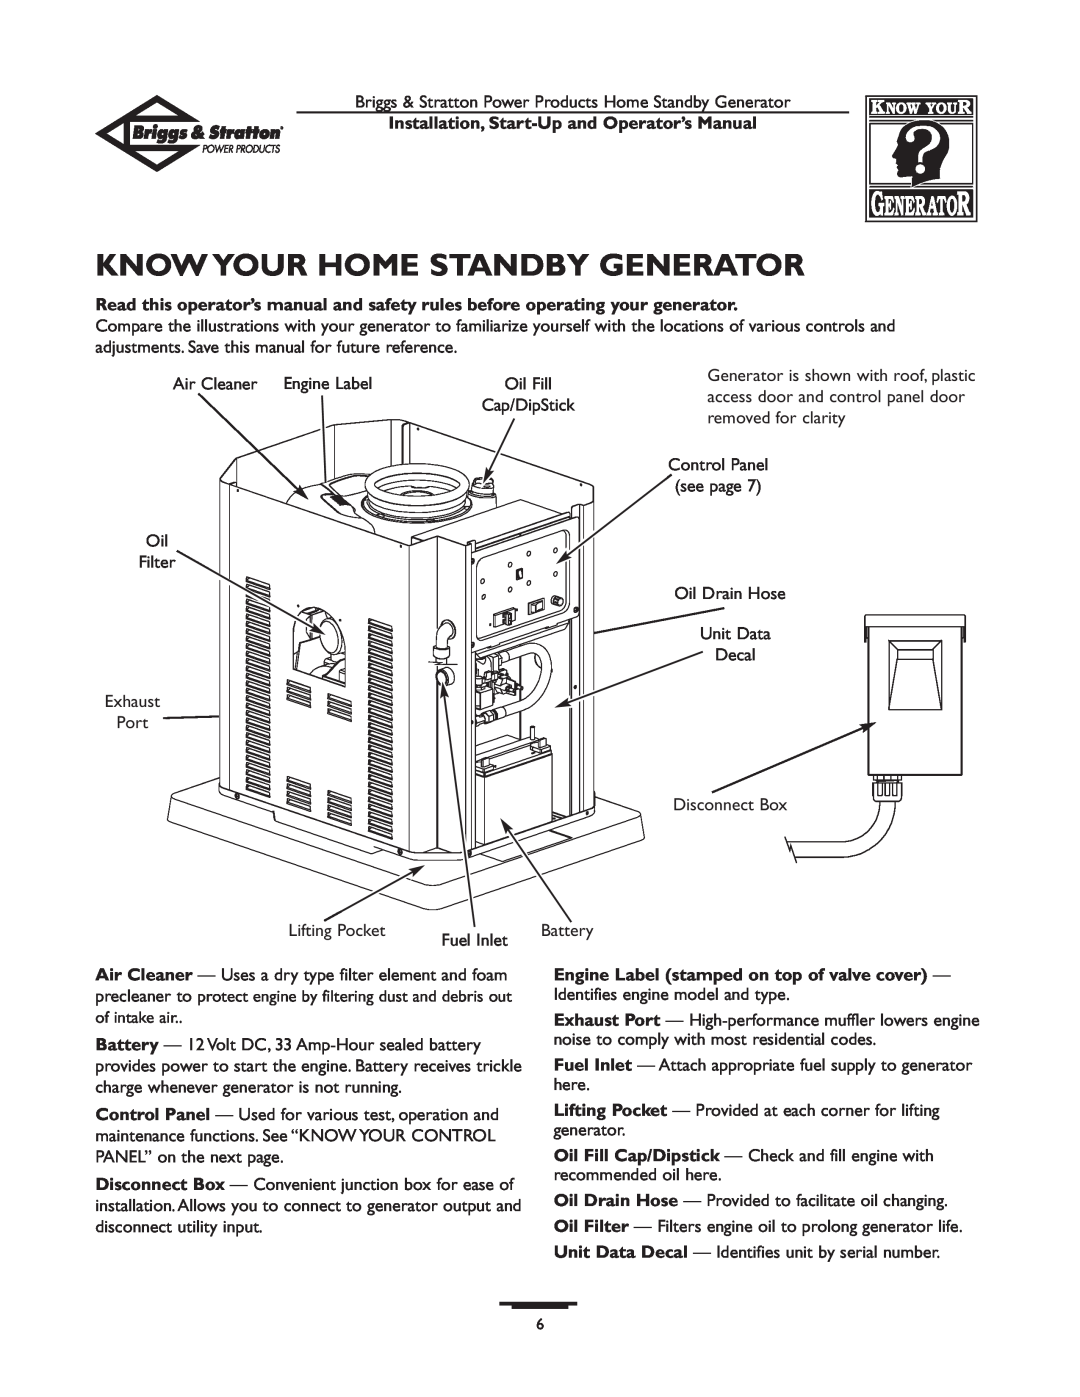 Briggs & Stratton 01897-0 manual Know Your Home Standby Generator, Installation, Start-Up and Operator’s Manual, Oil Fill 